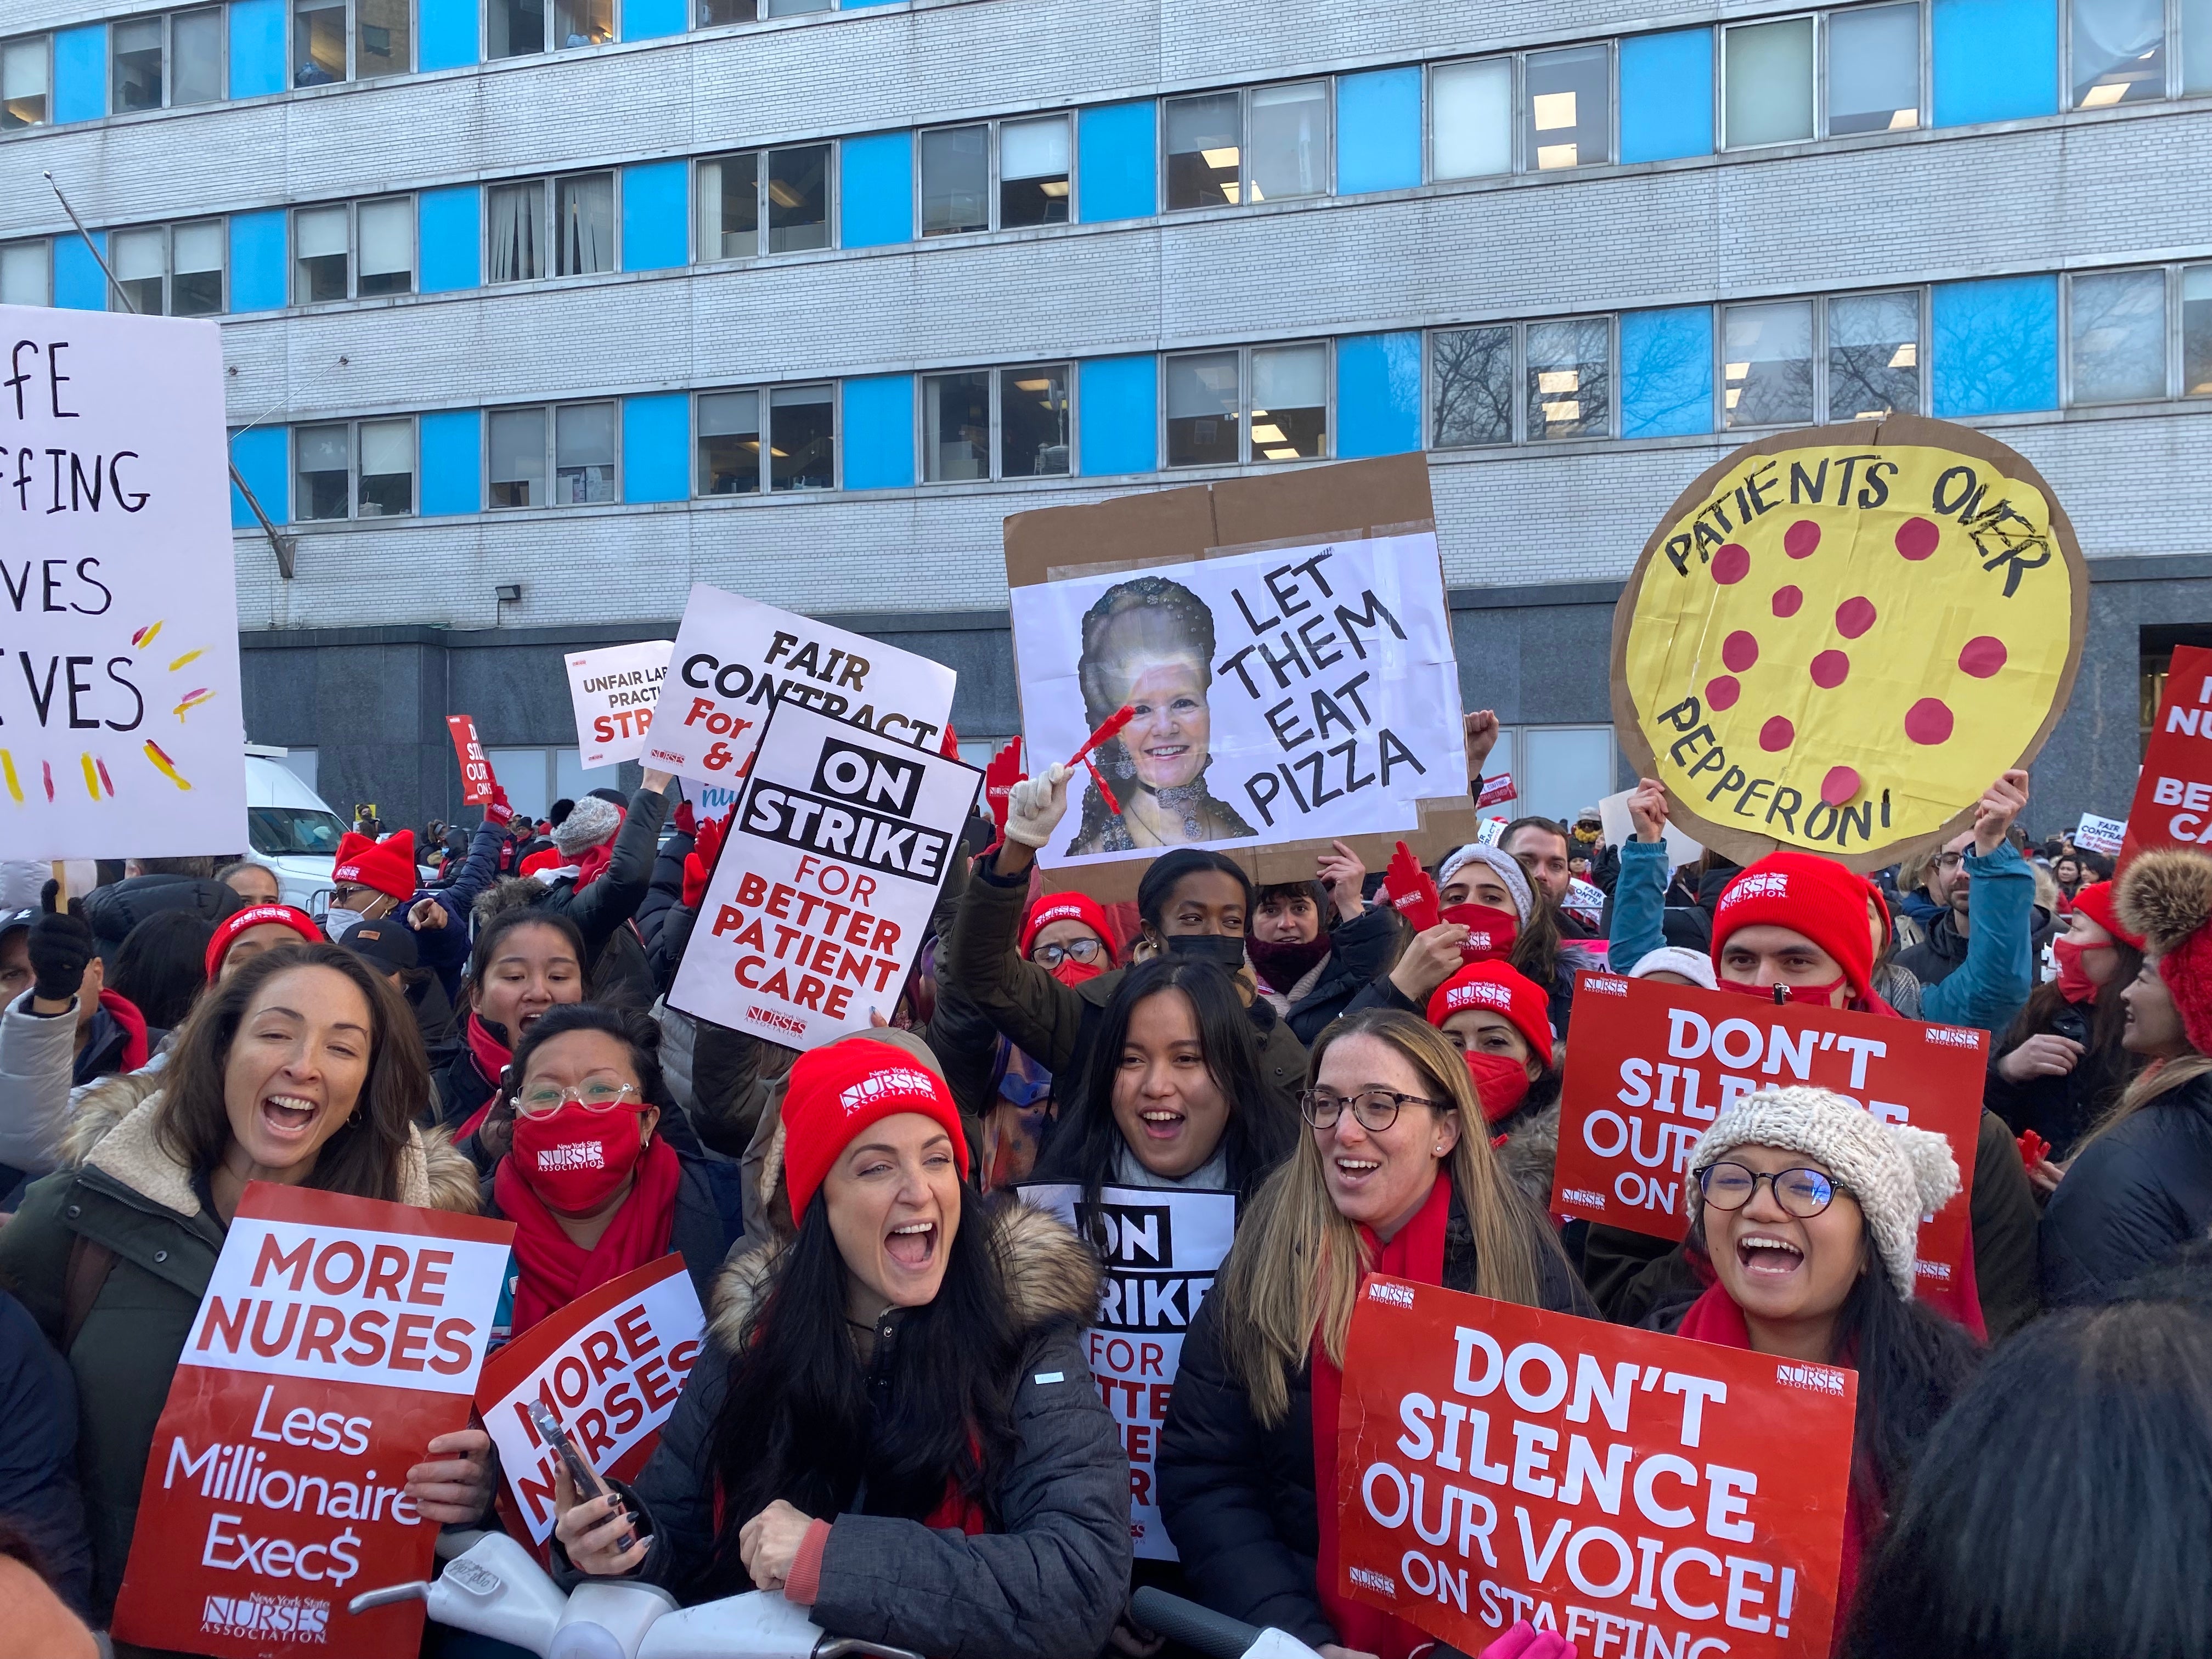 Members and supporters of the New York State Nurses Association launch a strike outside Mount Sinai hospital in Harlem on 9 January.